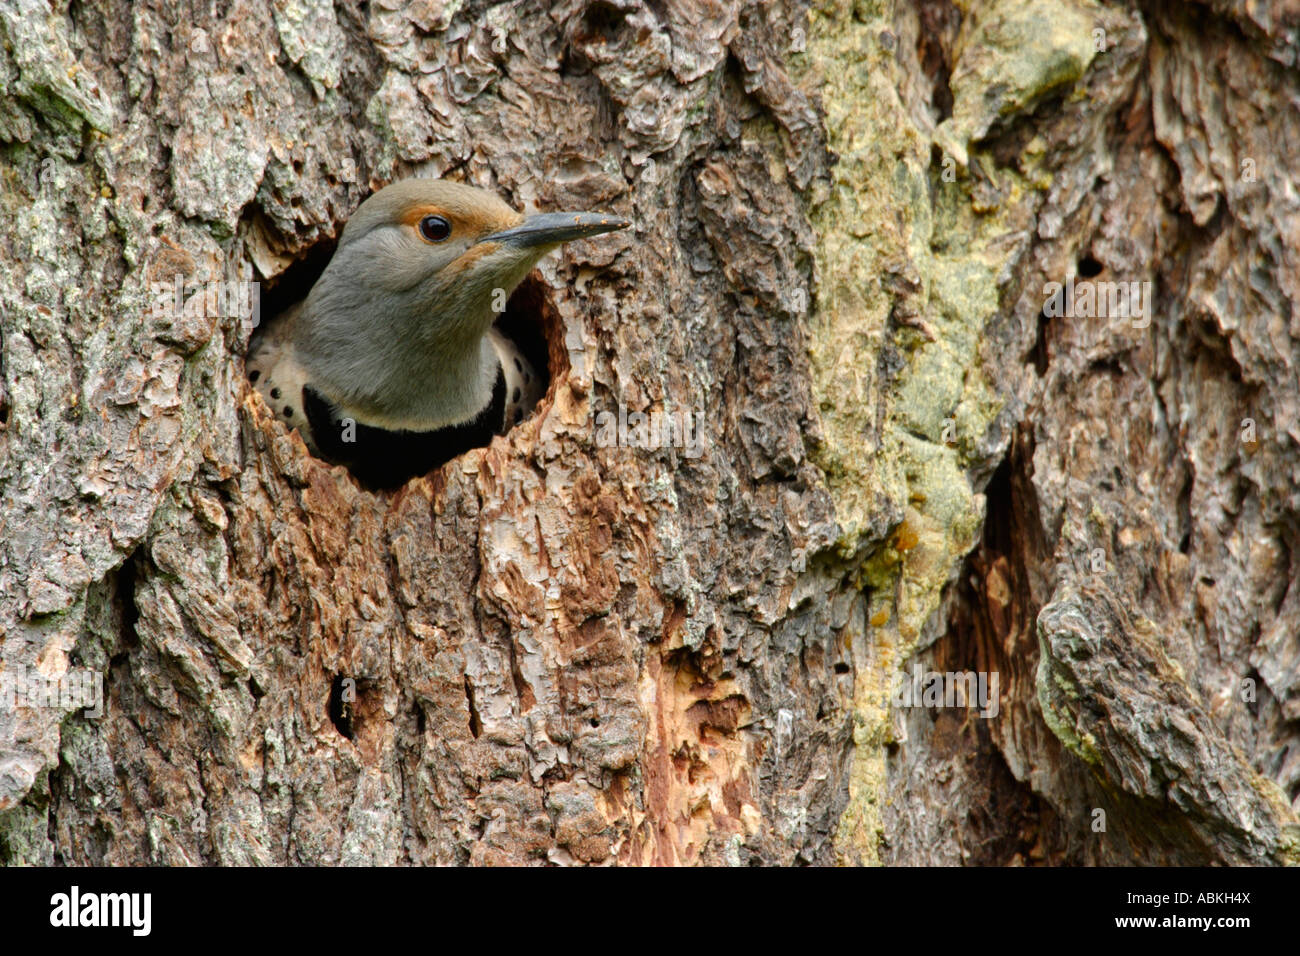 Northern flicker emerging from nest hole in dead Douglas fir tree Metchosin British Columbia Canada Stock Photo